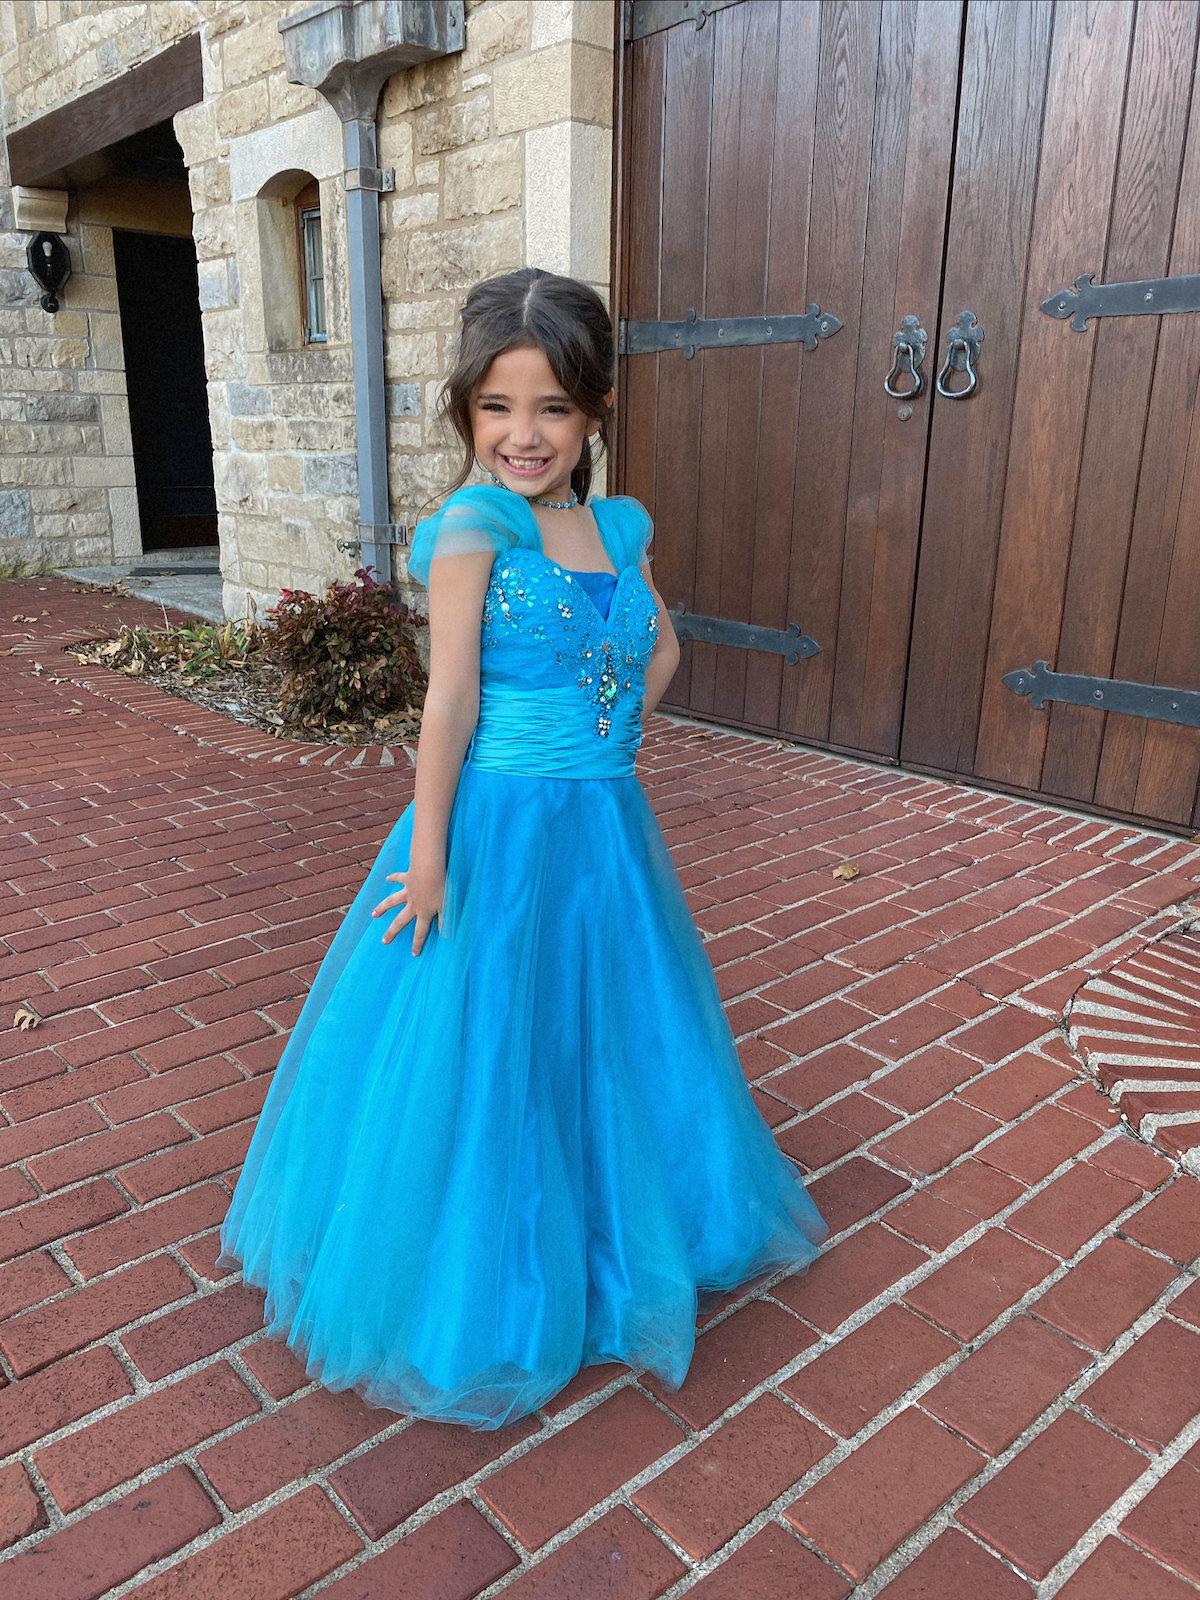 Sterling wearing her mom's prom dress. (SWNS)